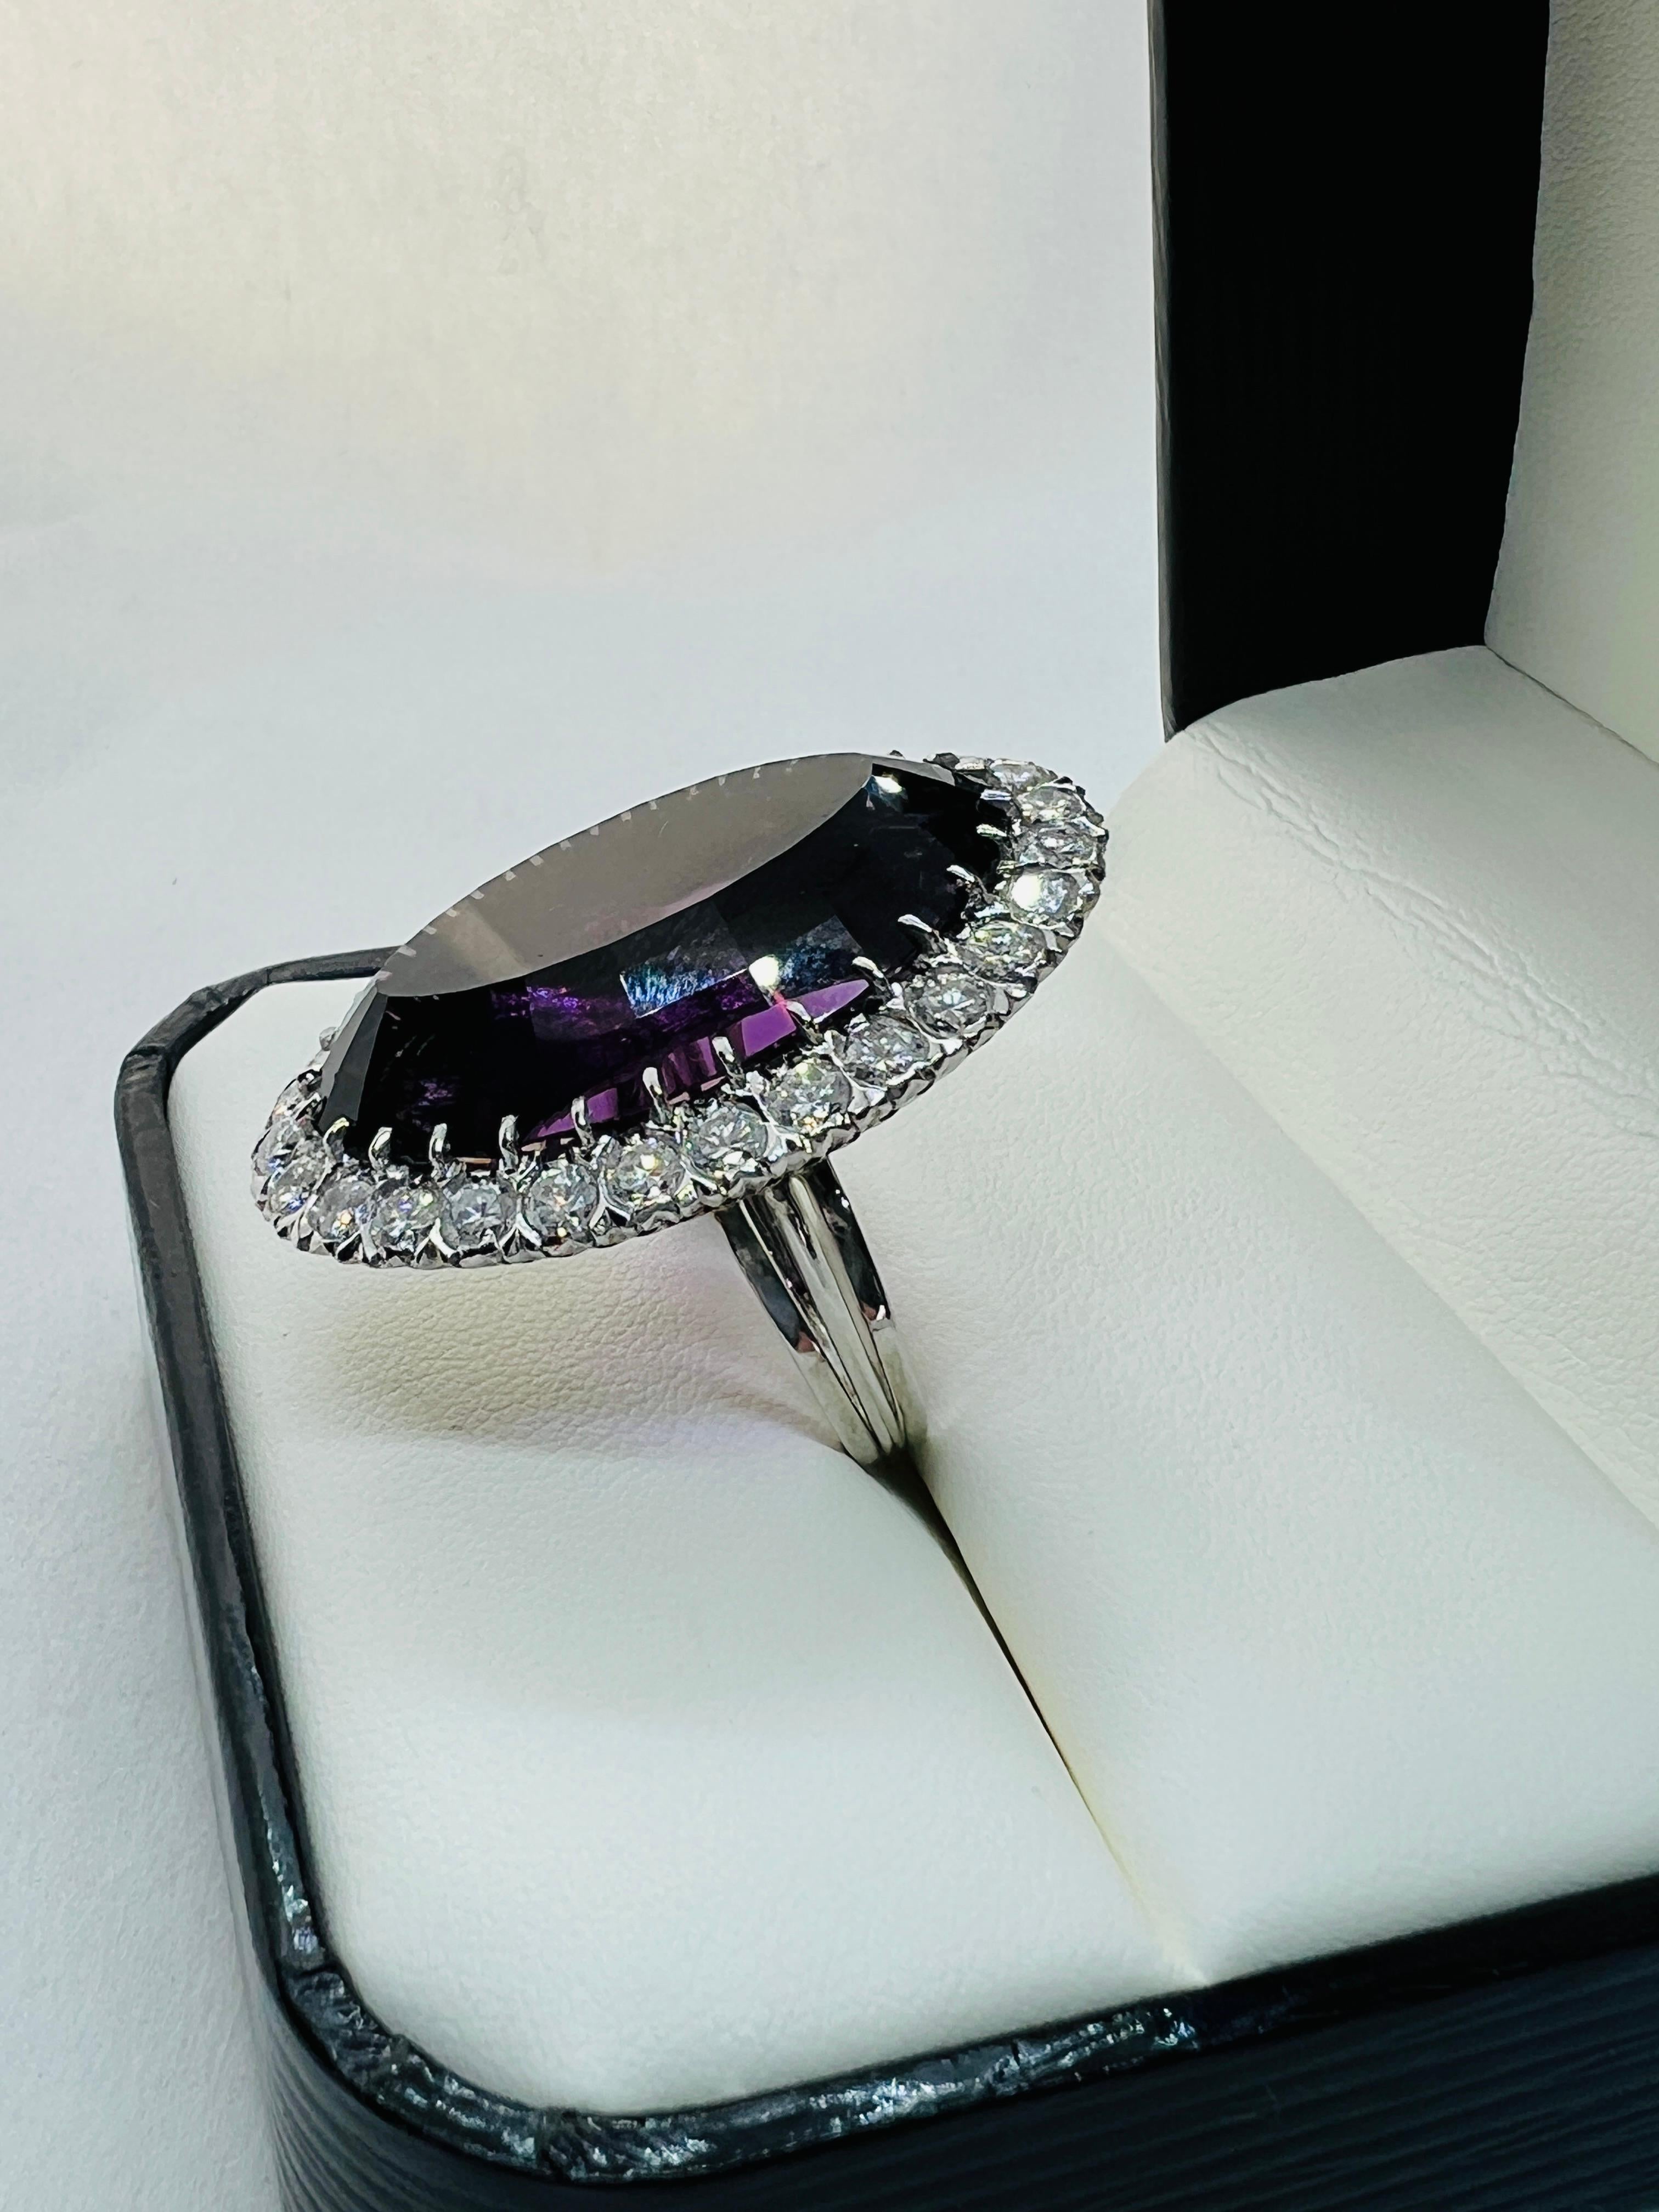 Absolutely Stunning Ladies Cocktail Ring!!! Made in Platinum, this ring features a beautiful 40 carat, oval amethyst. The amethyst is surrounded by 29 round diamonds with an estimated total weight of 3 carats. The oval measures 1.50 inches by 1.25